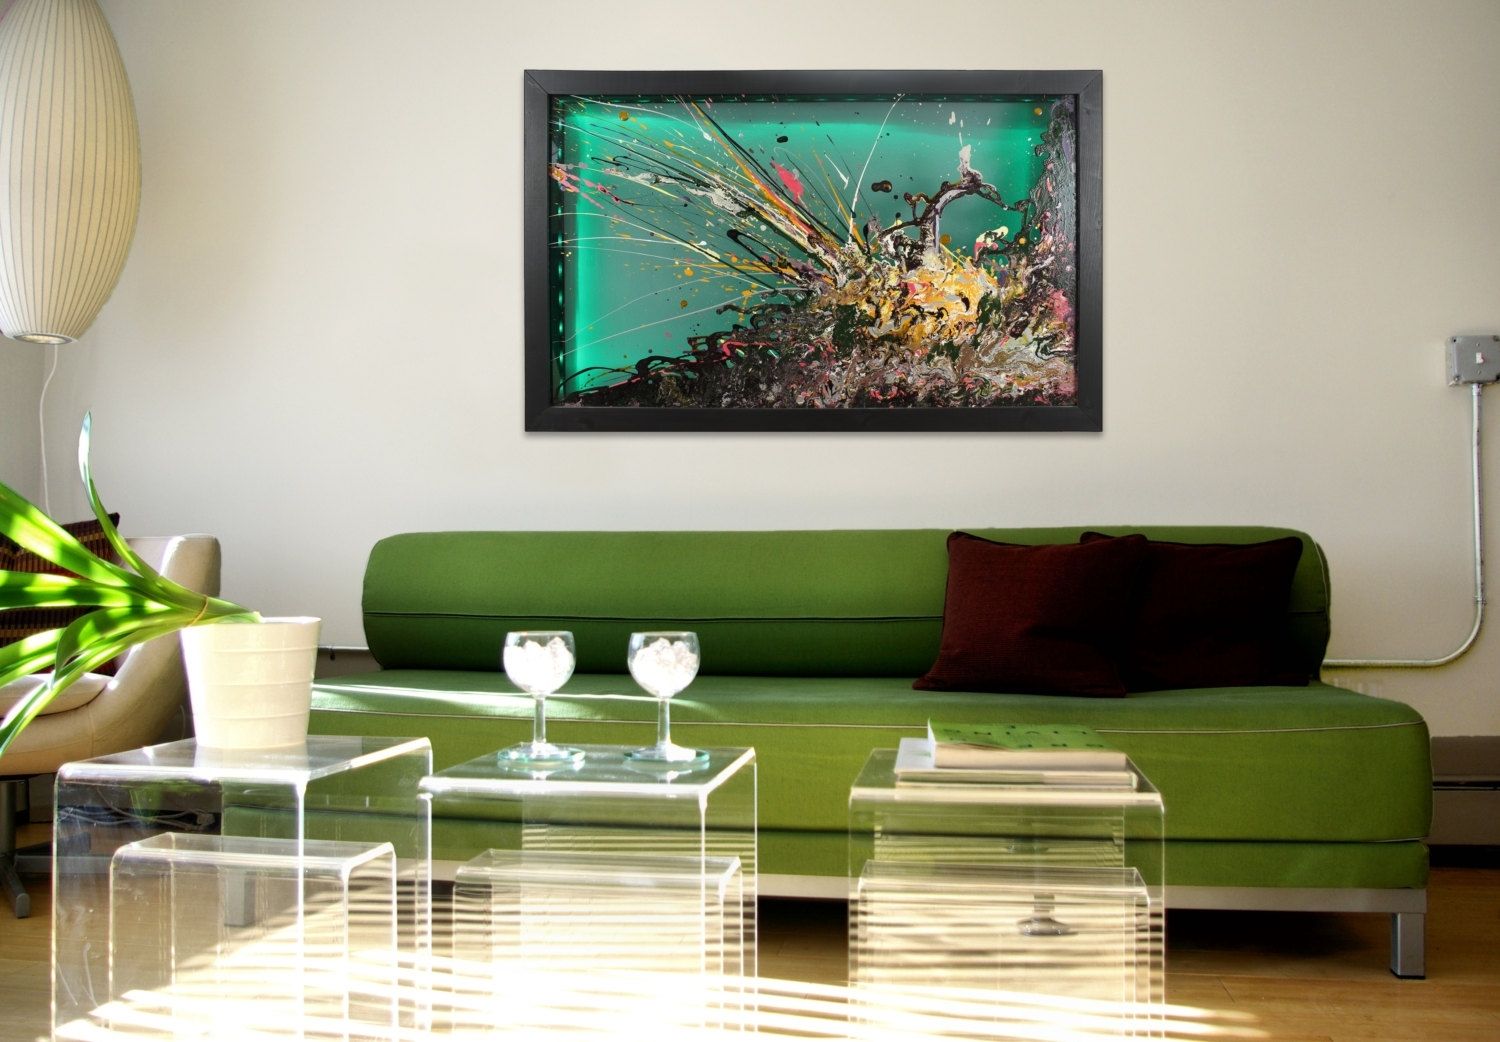 Wall Art Design: Unusual Wall Art Glass Wall Art Large Abstract Pertaining To Recent Giant Abstract Wall Art (View 5 of 20)